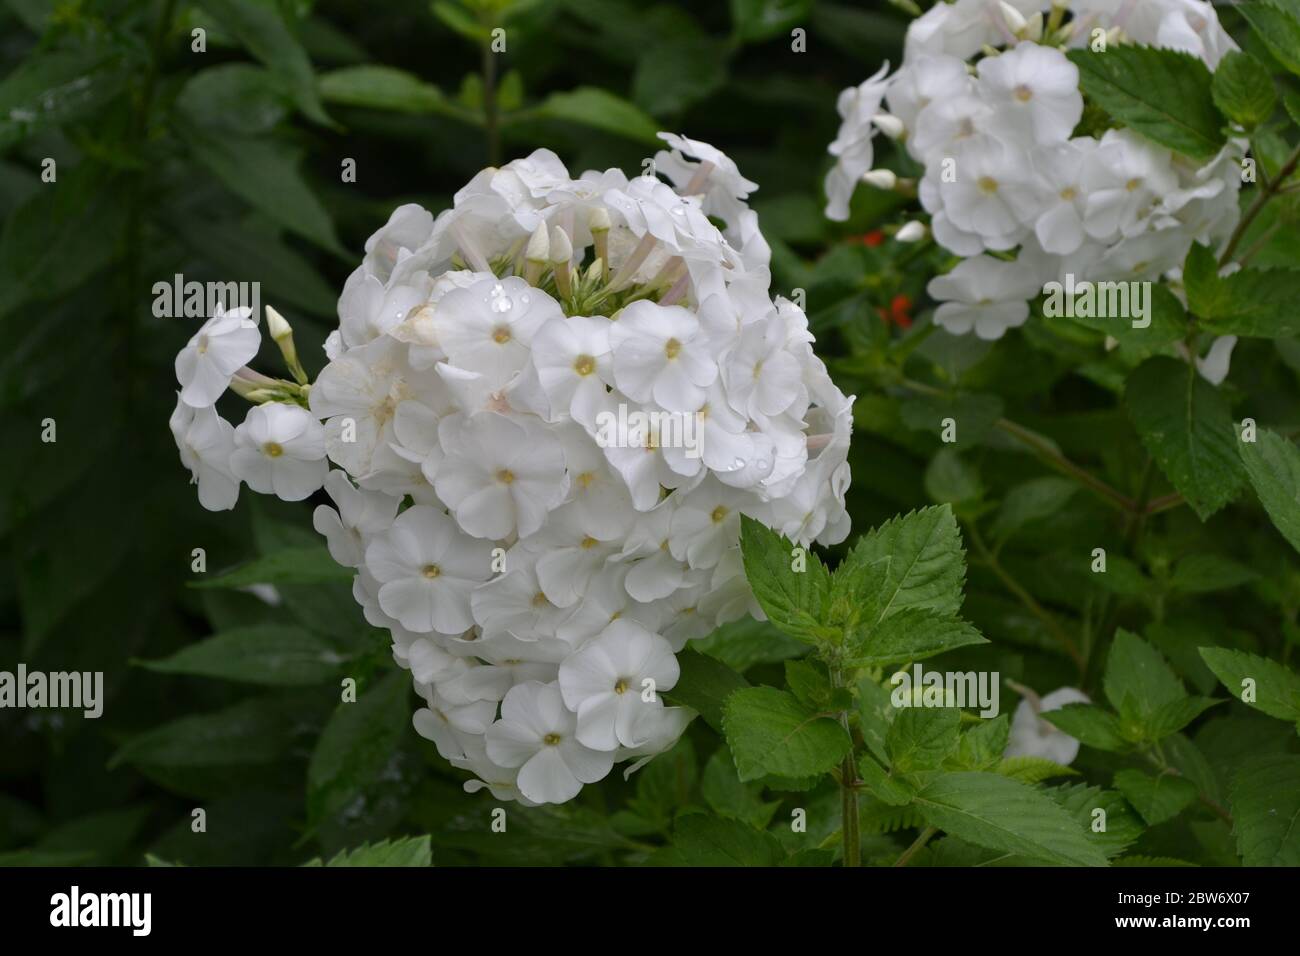 Green. Gardening. Home. Phlox flower. Perennial herbaceous plant. High branches. White flowers Stock Photo